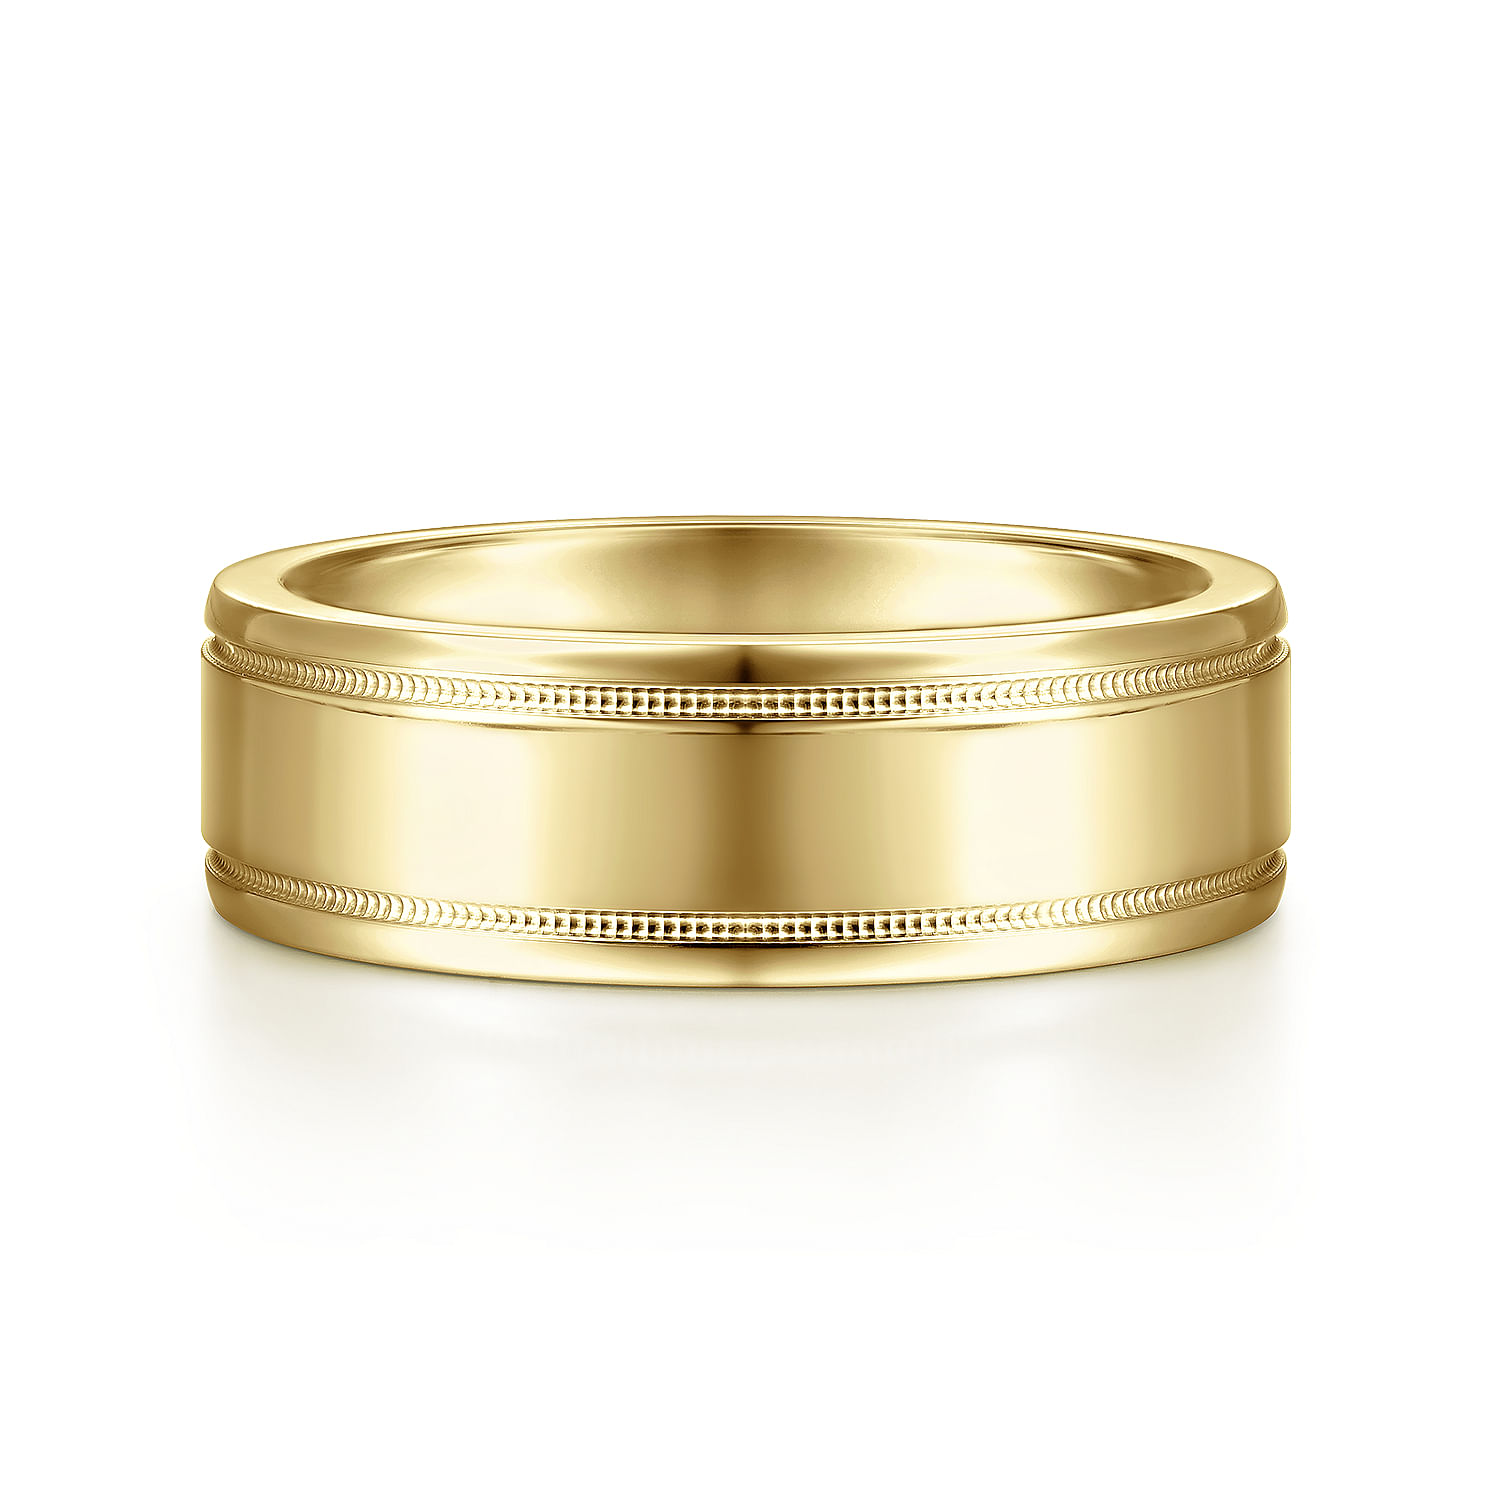 Fred - 14K Yellow Gold 7mm -  High Polished Men's Wedding Band with Millgrain